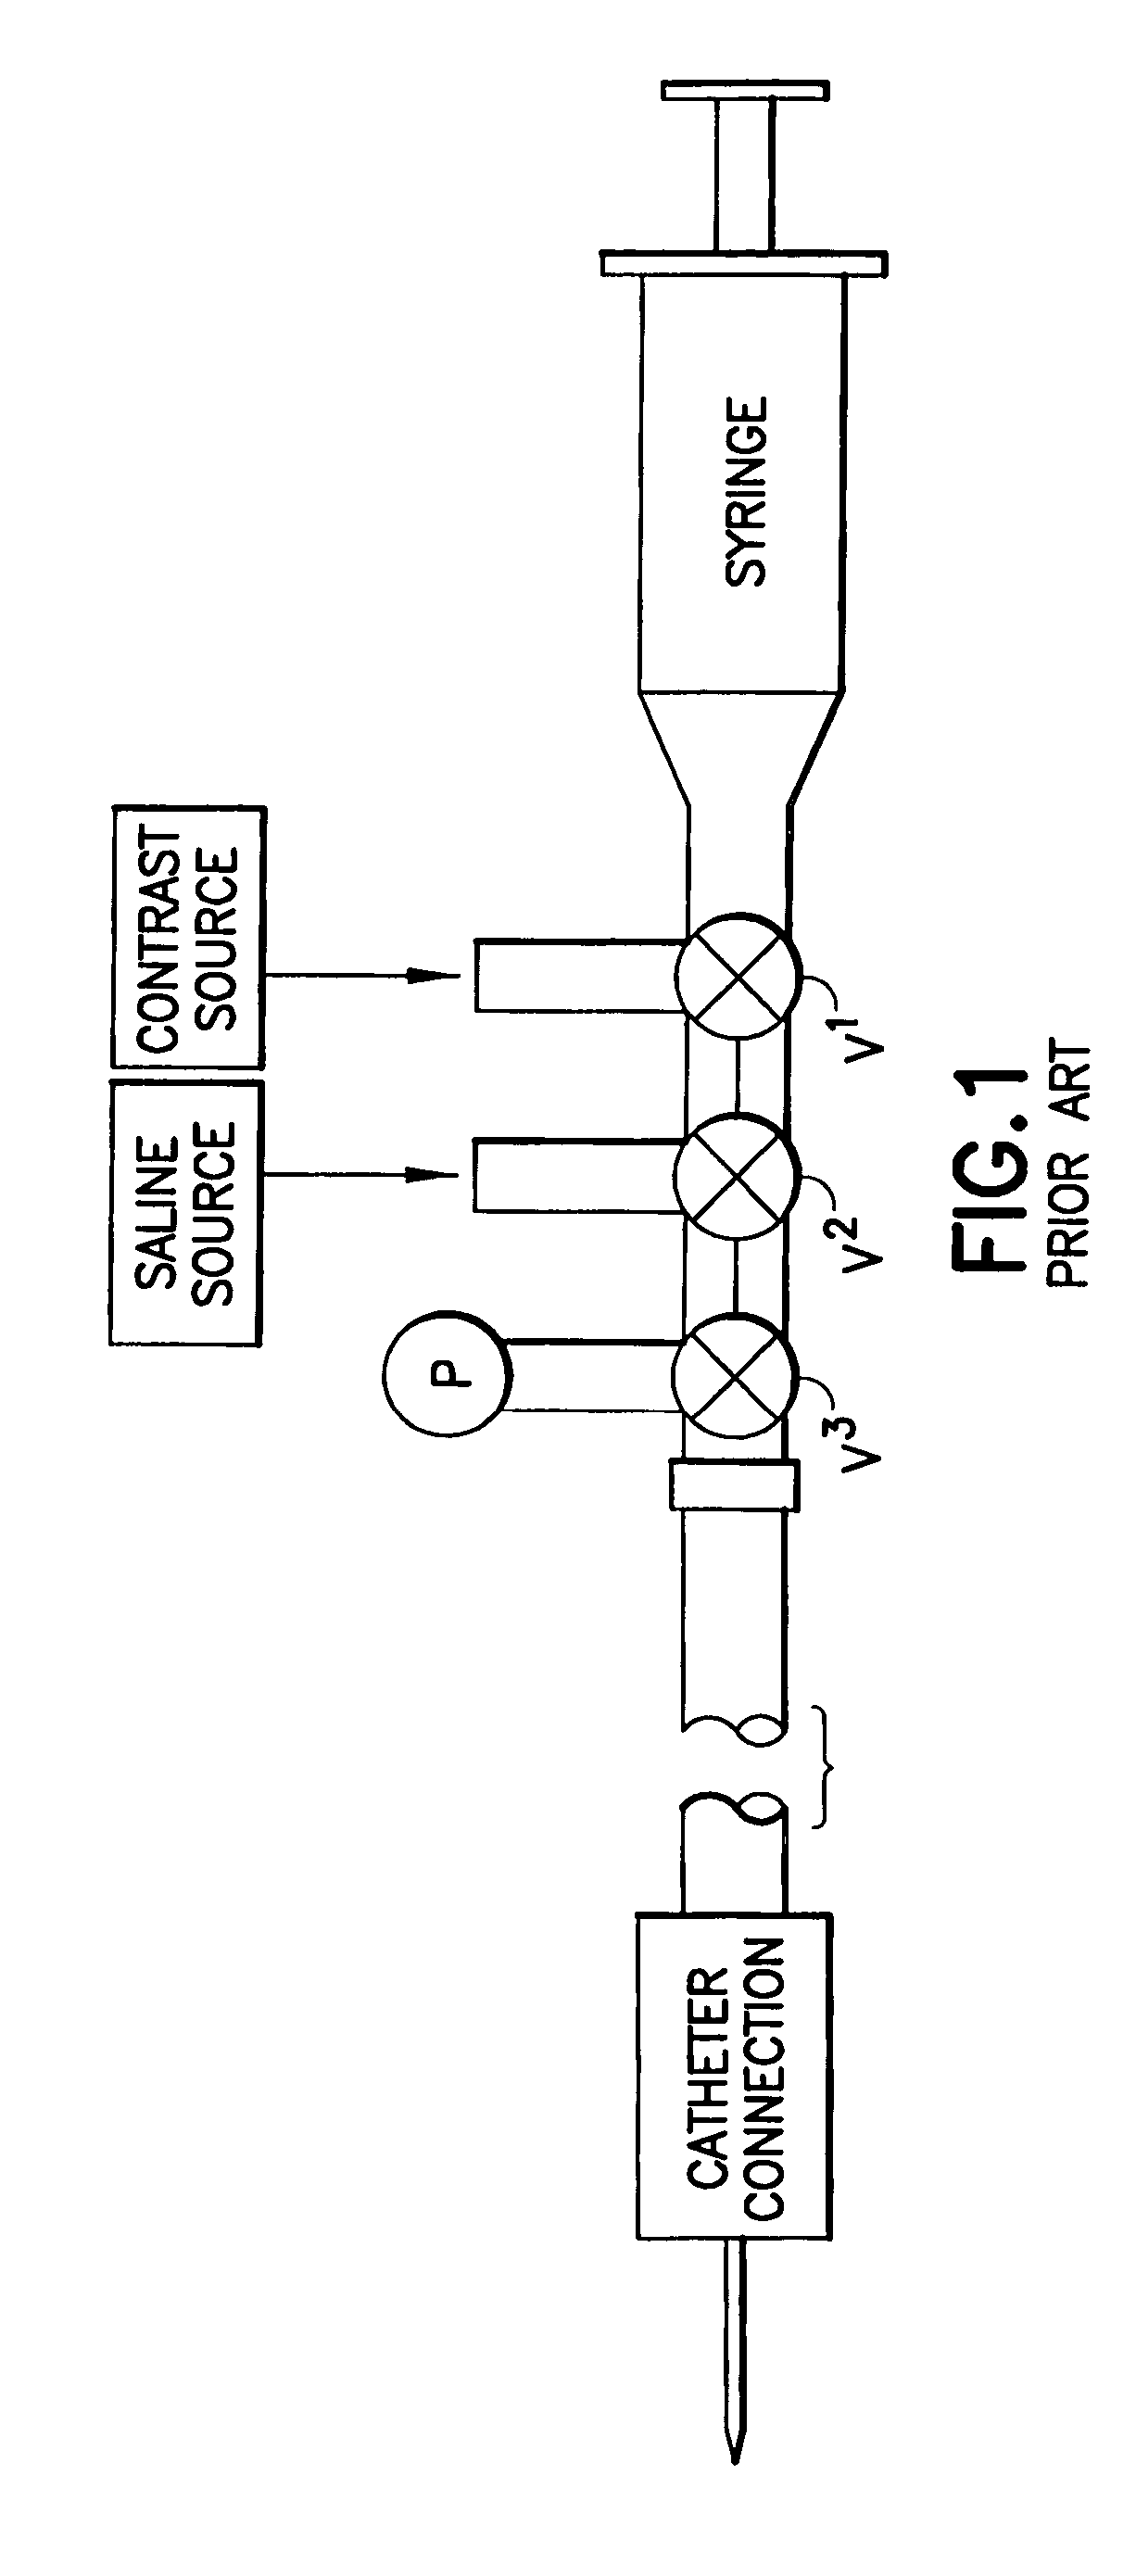 Fluid delivery system having a fluid level sensor and a fluid control device for isolating a patient from a pump device